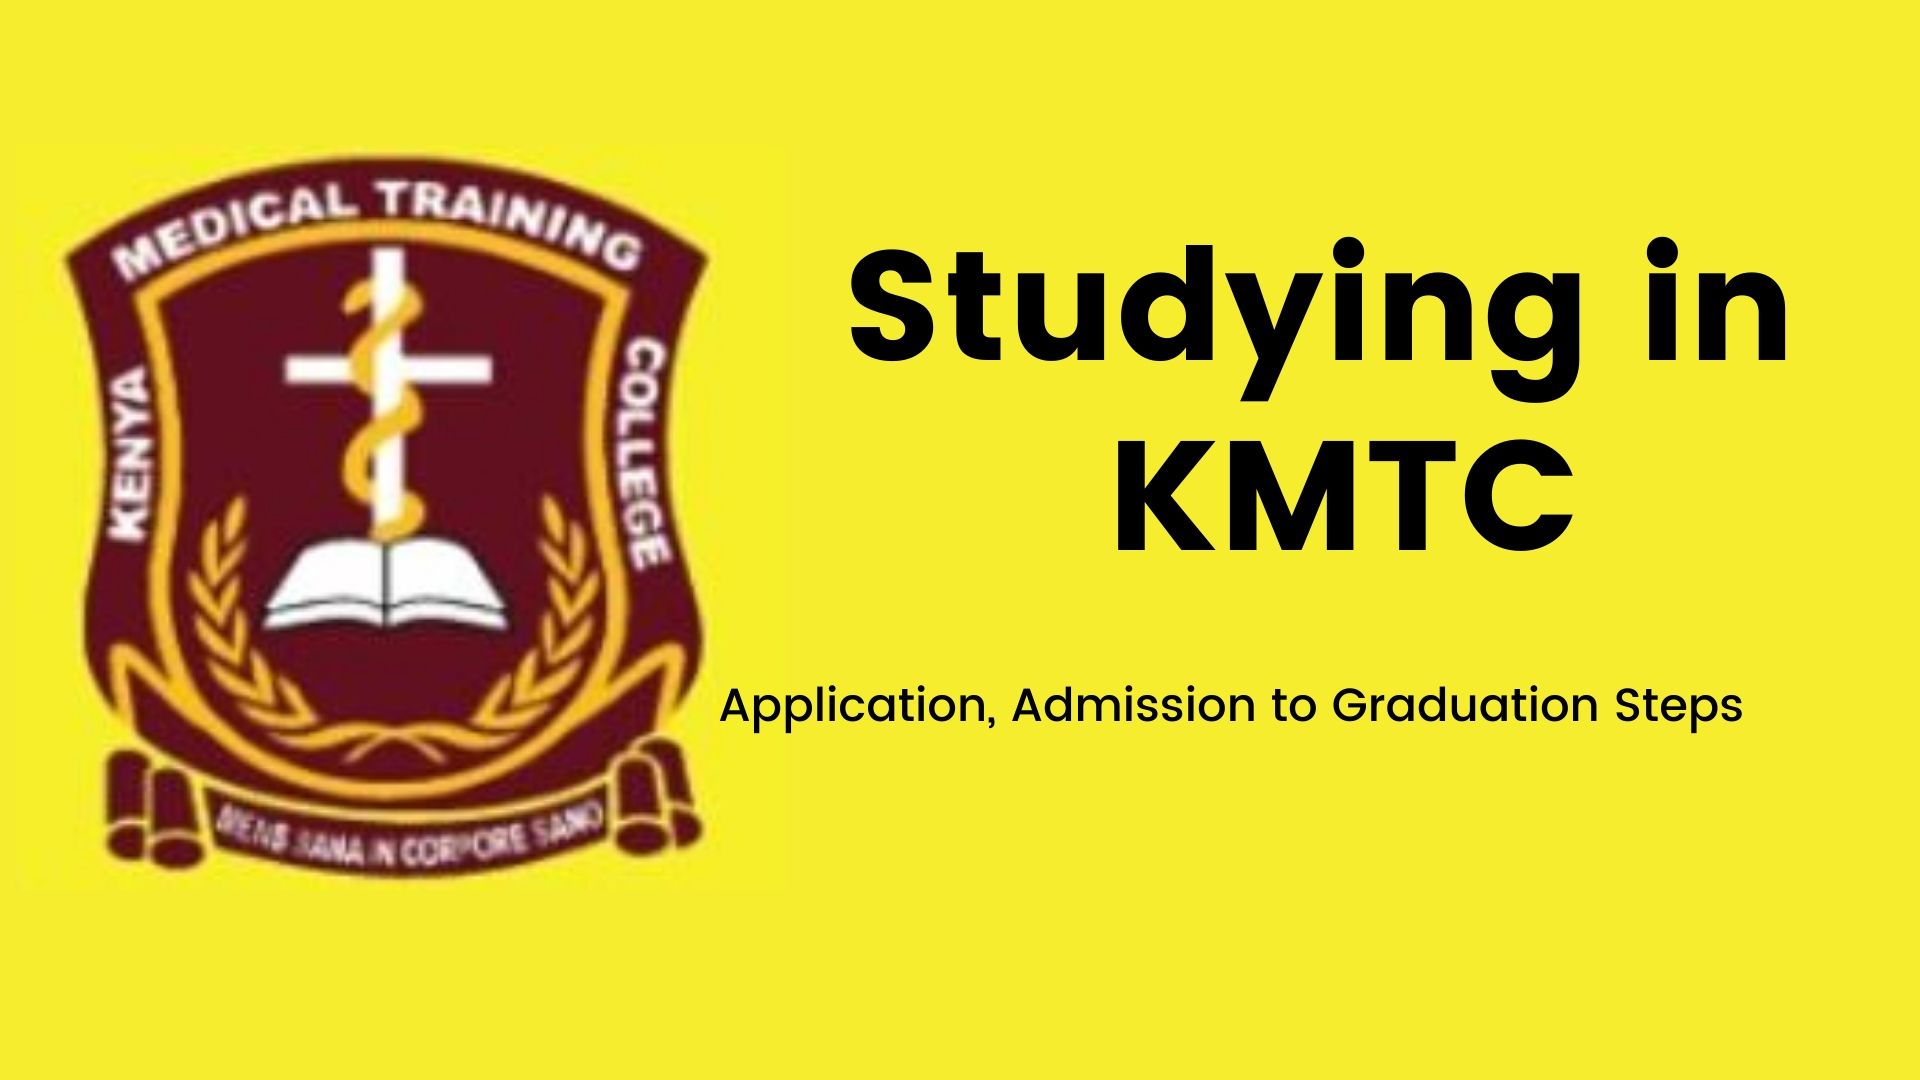 Studying in KMTC: Application, Admission to Graduation Steps